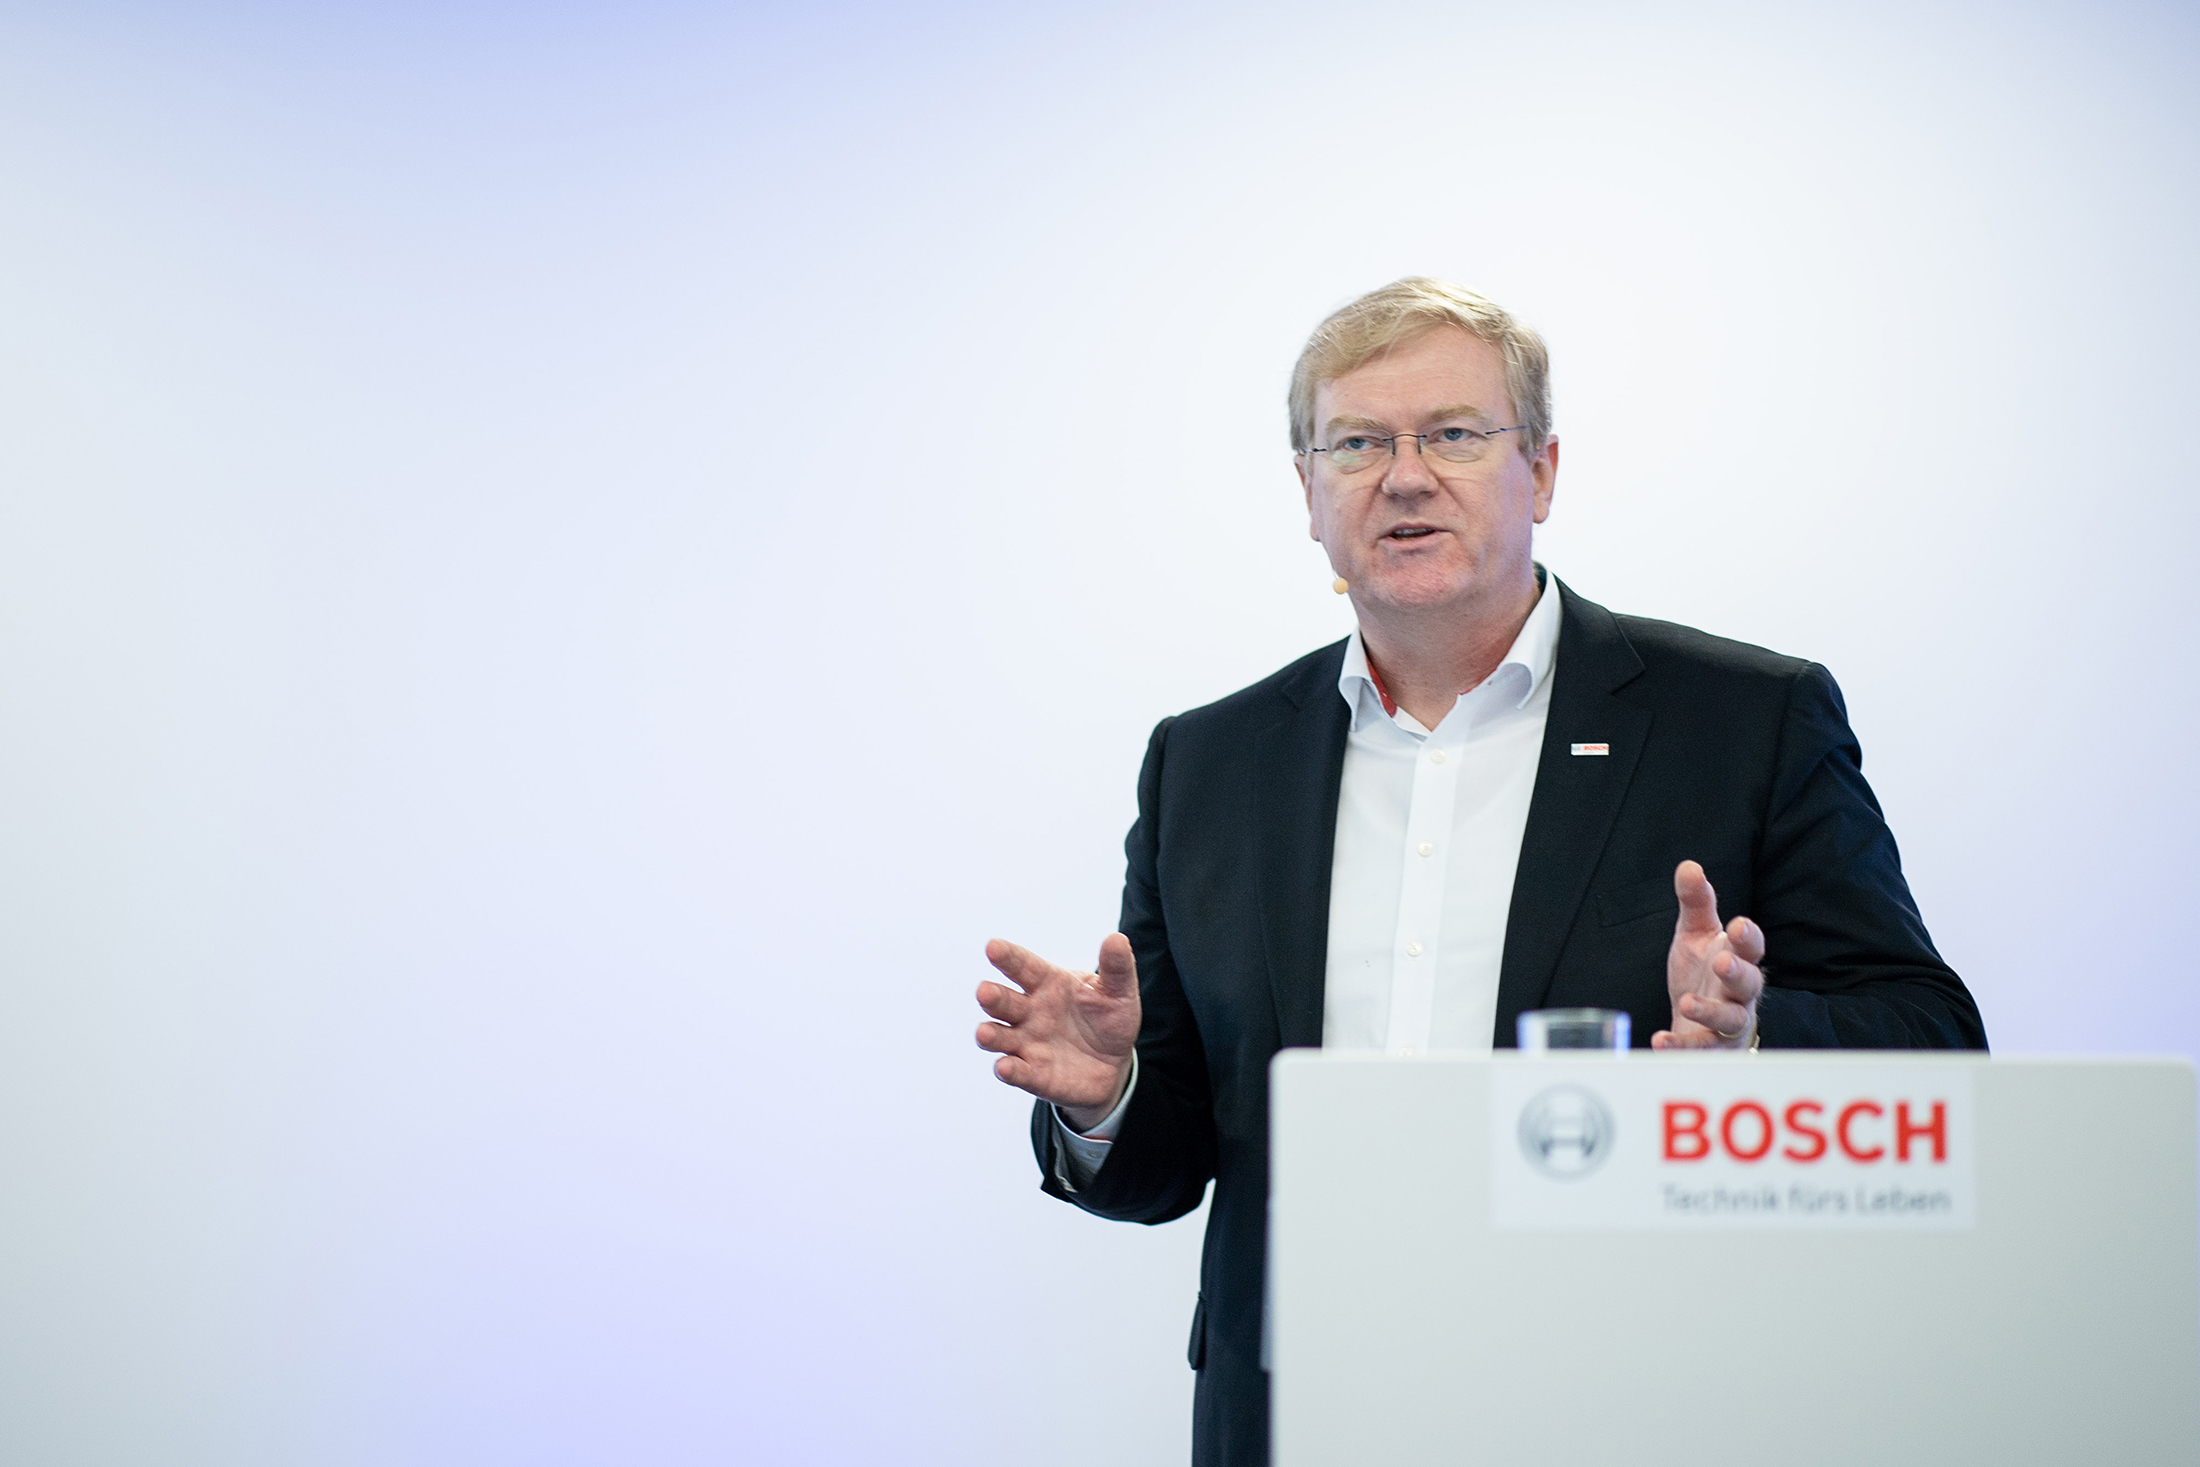 Bosch sees growth in 2021, but warns on chips shortage